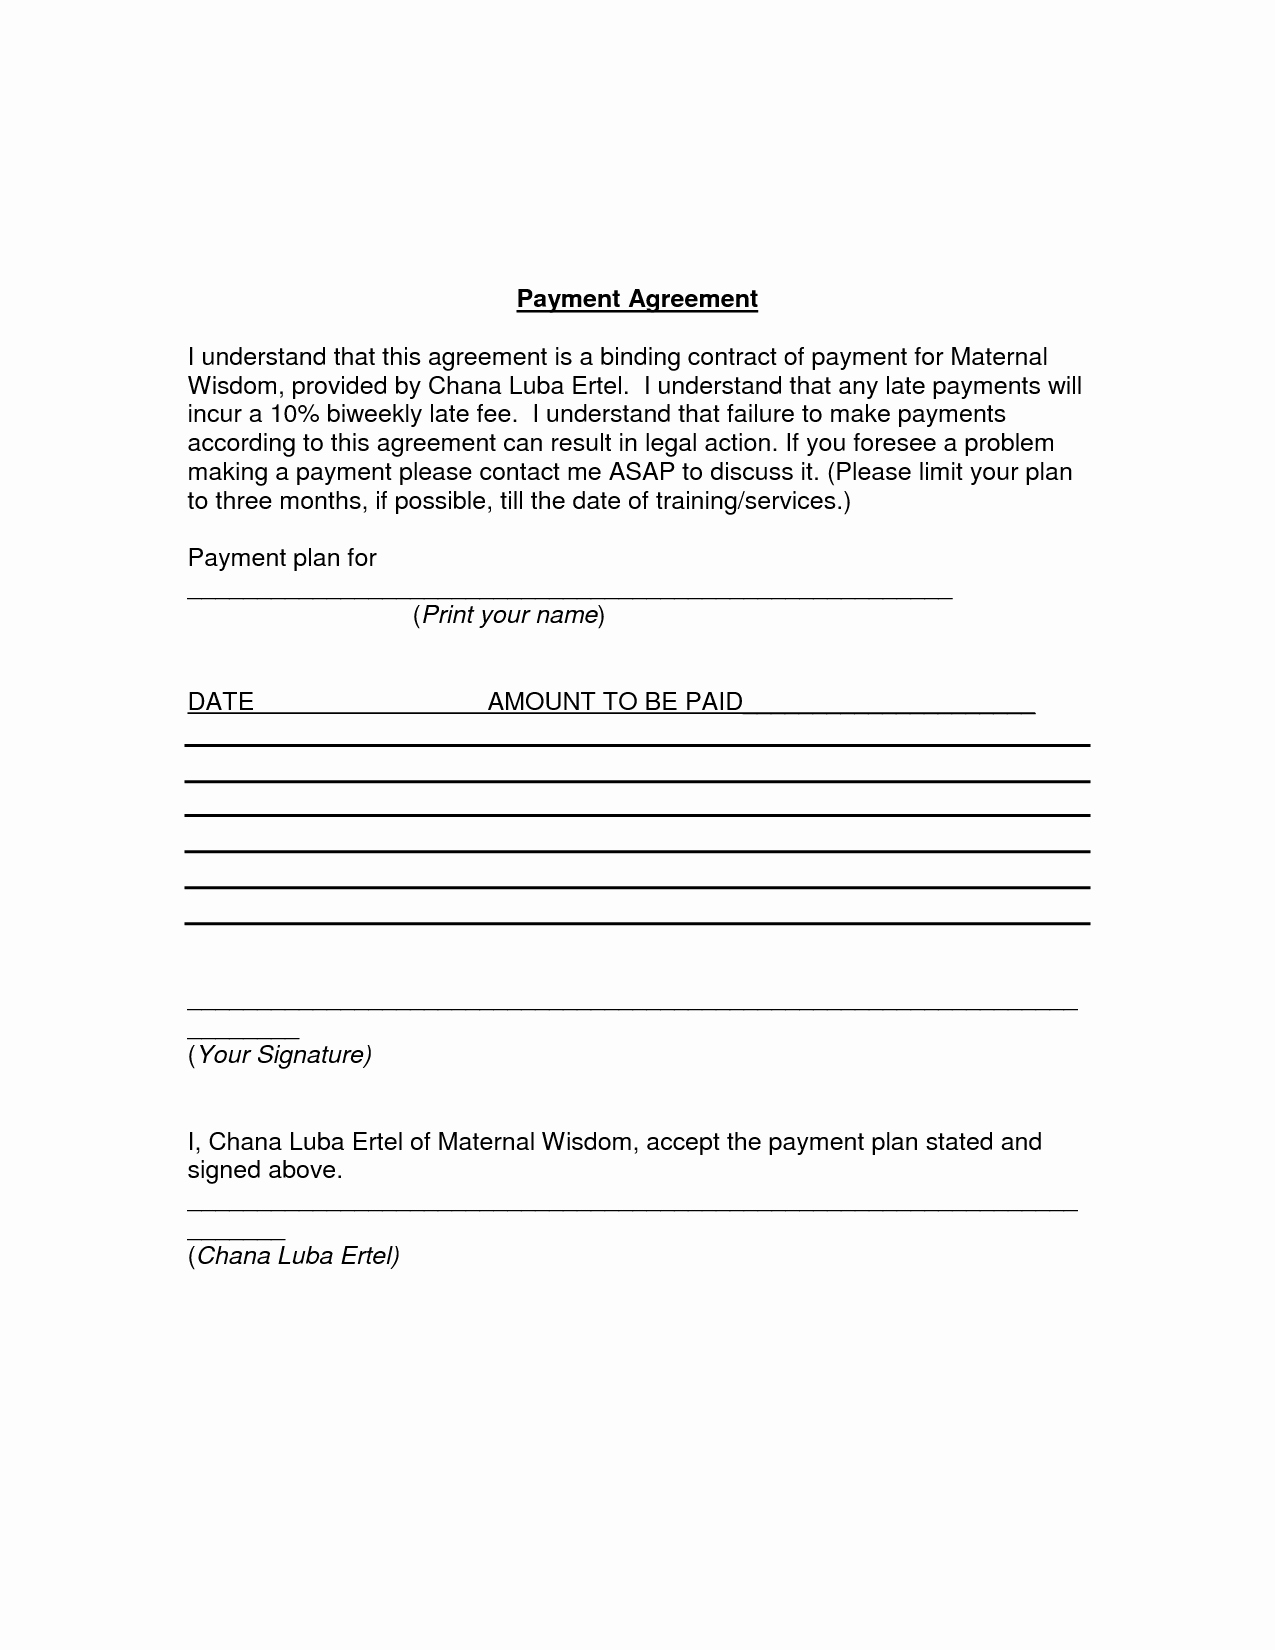 Payment Agreement Contract Pdf Awesome 5 Payment Agreement Templates Word Excel Pdf formats